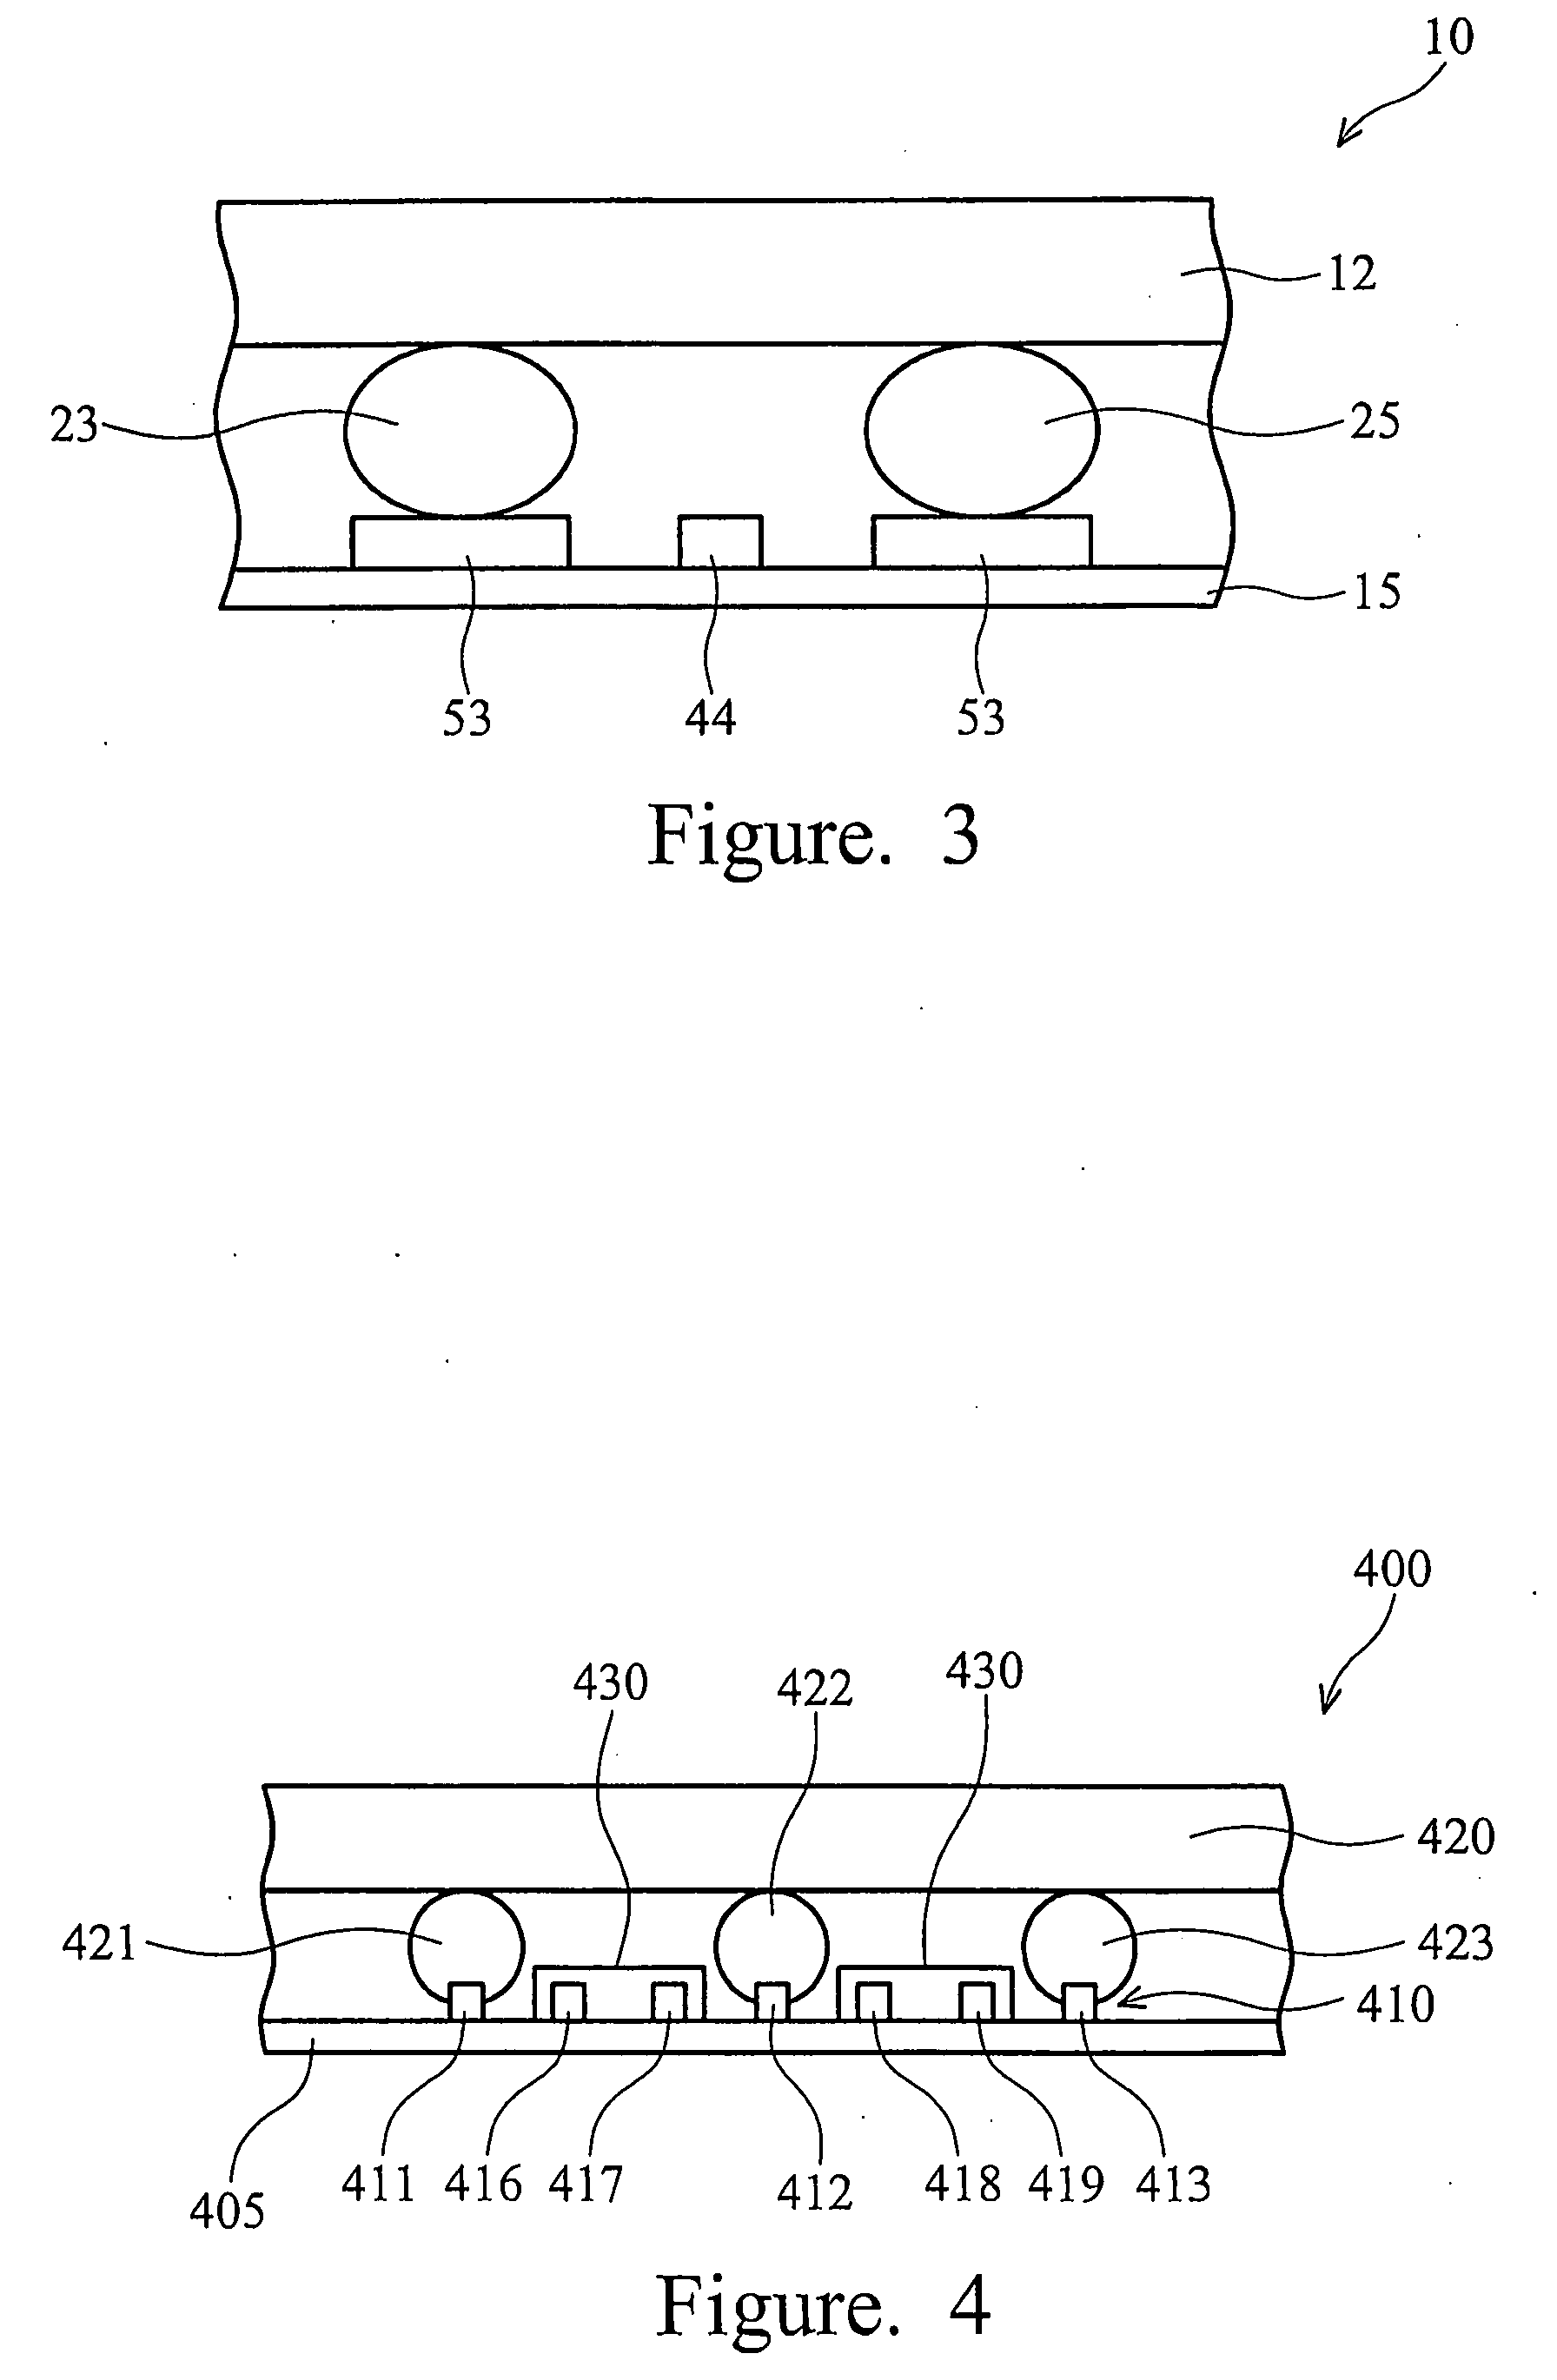 Novel substrate design for semiconductor device